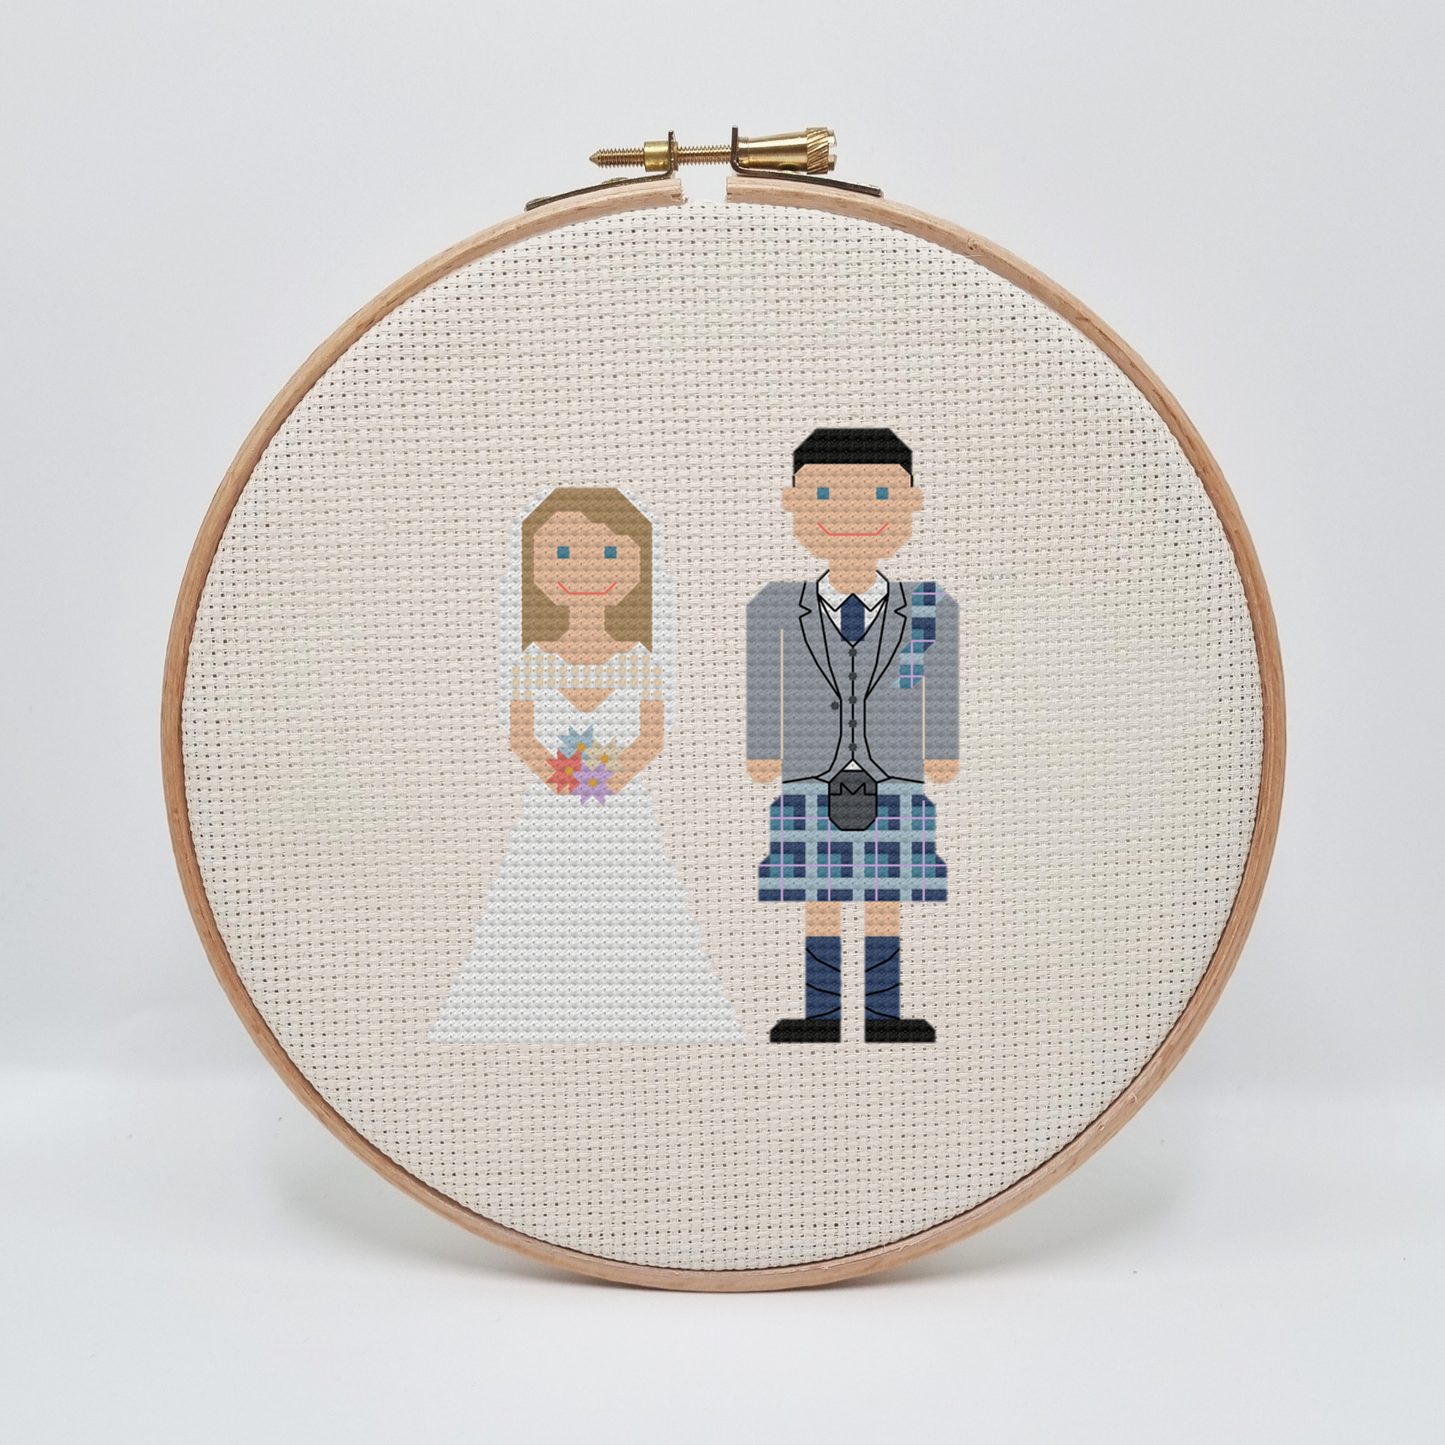 Melocharacters: The Wedding Edition Cross Stitch Kit